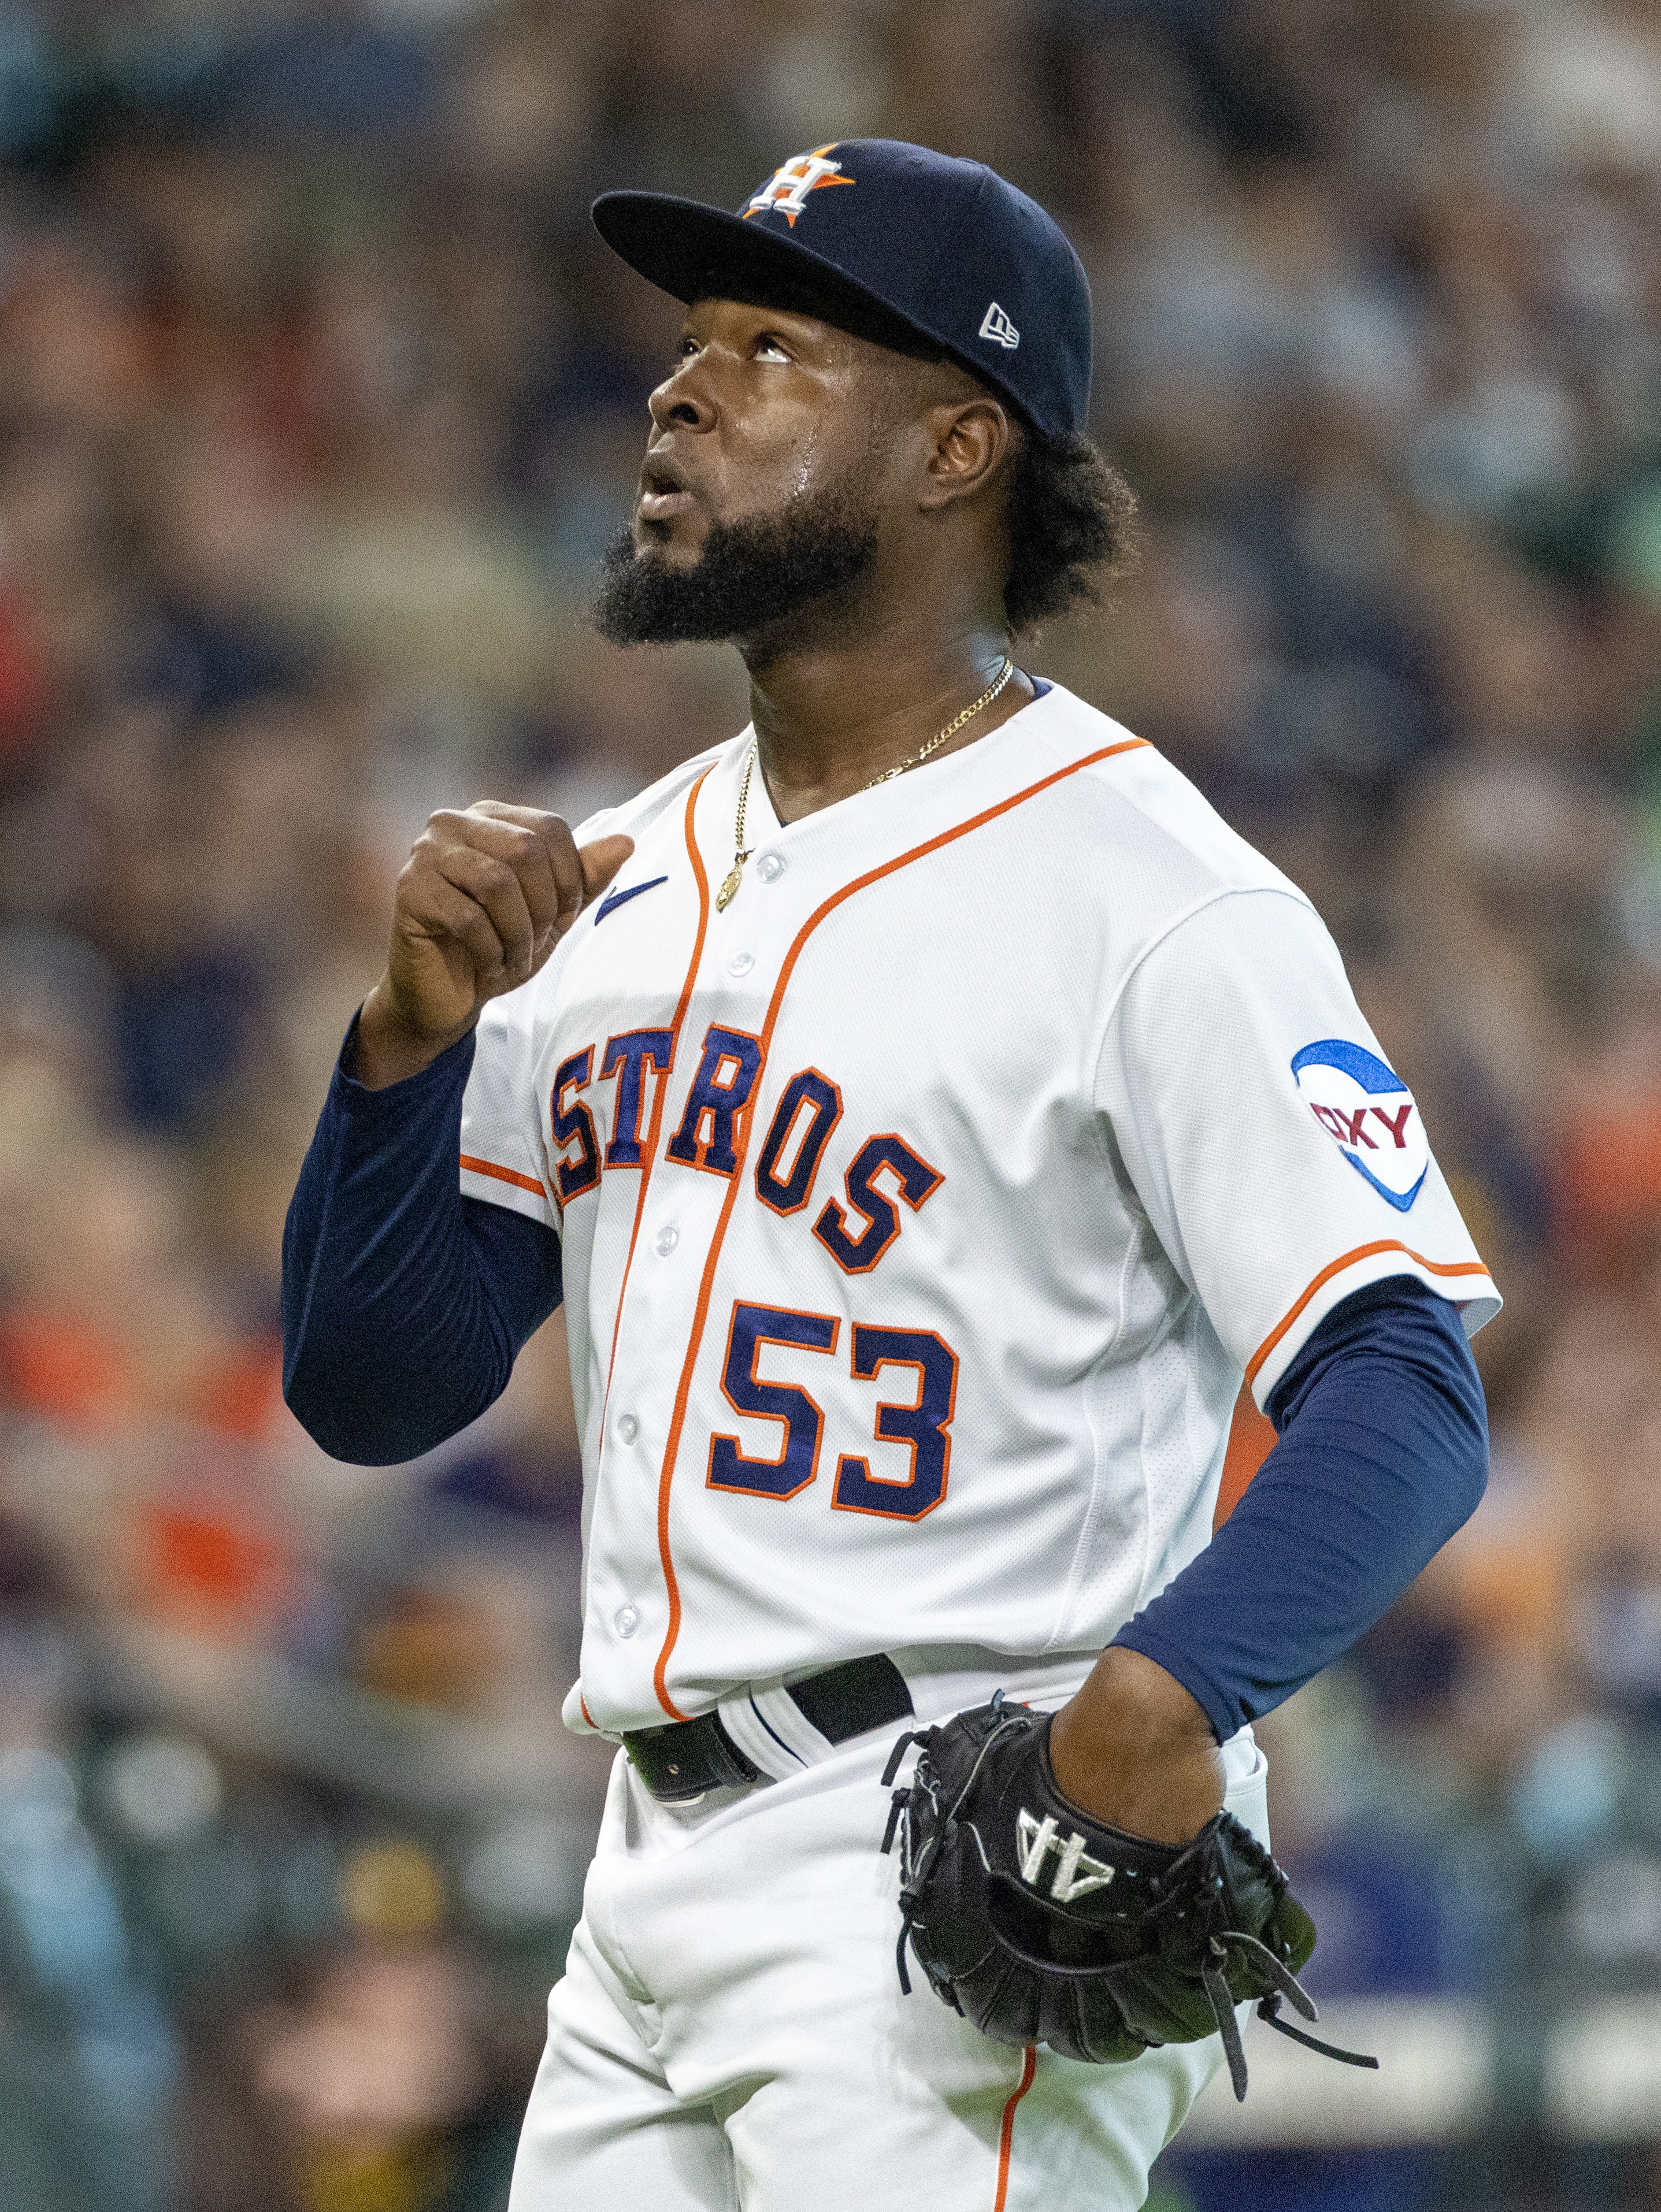 Huge two-out rally in 8th propels Mariners past Astros